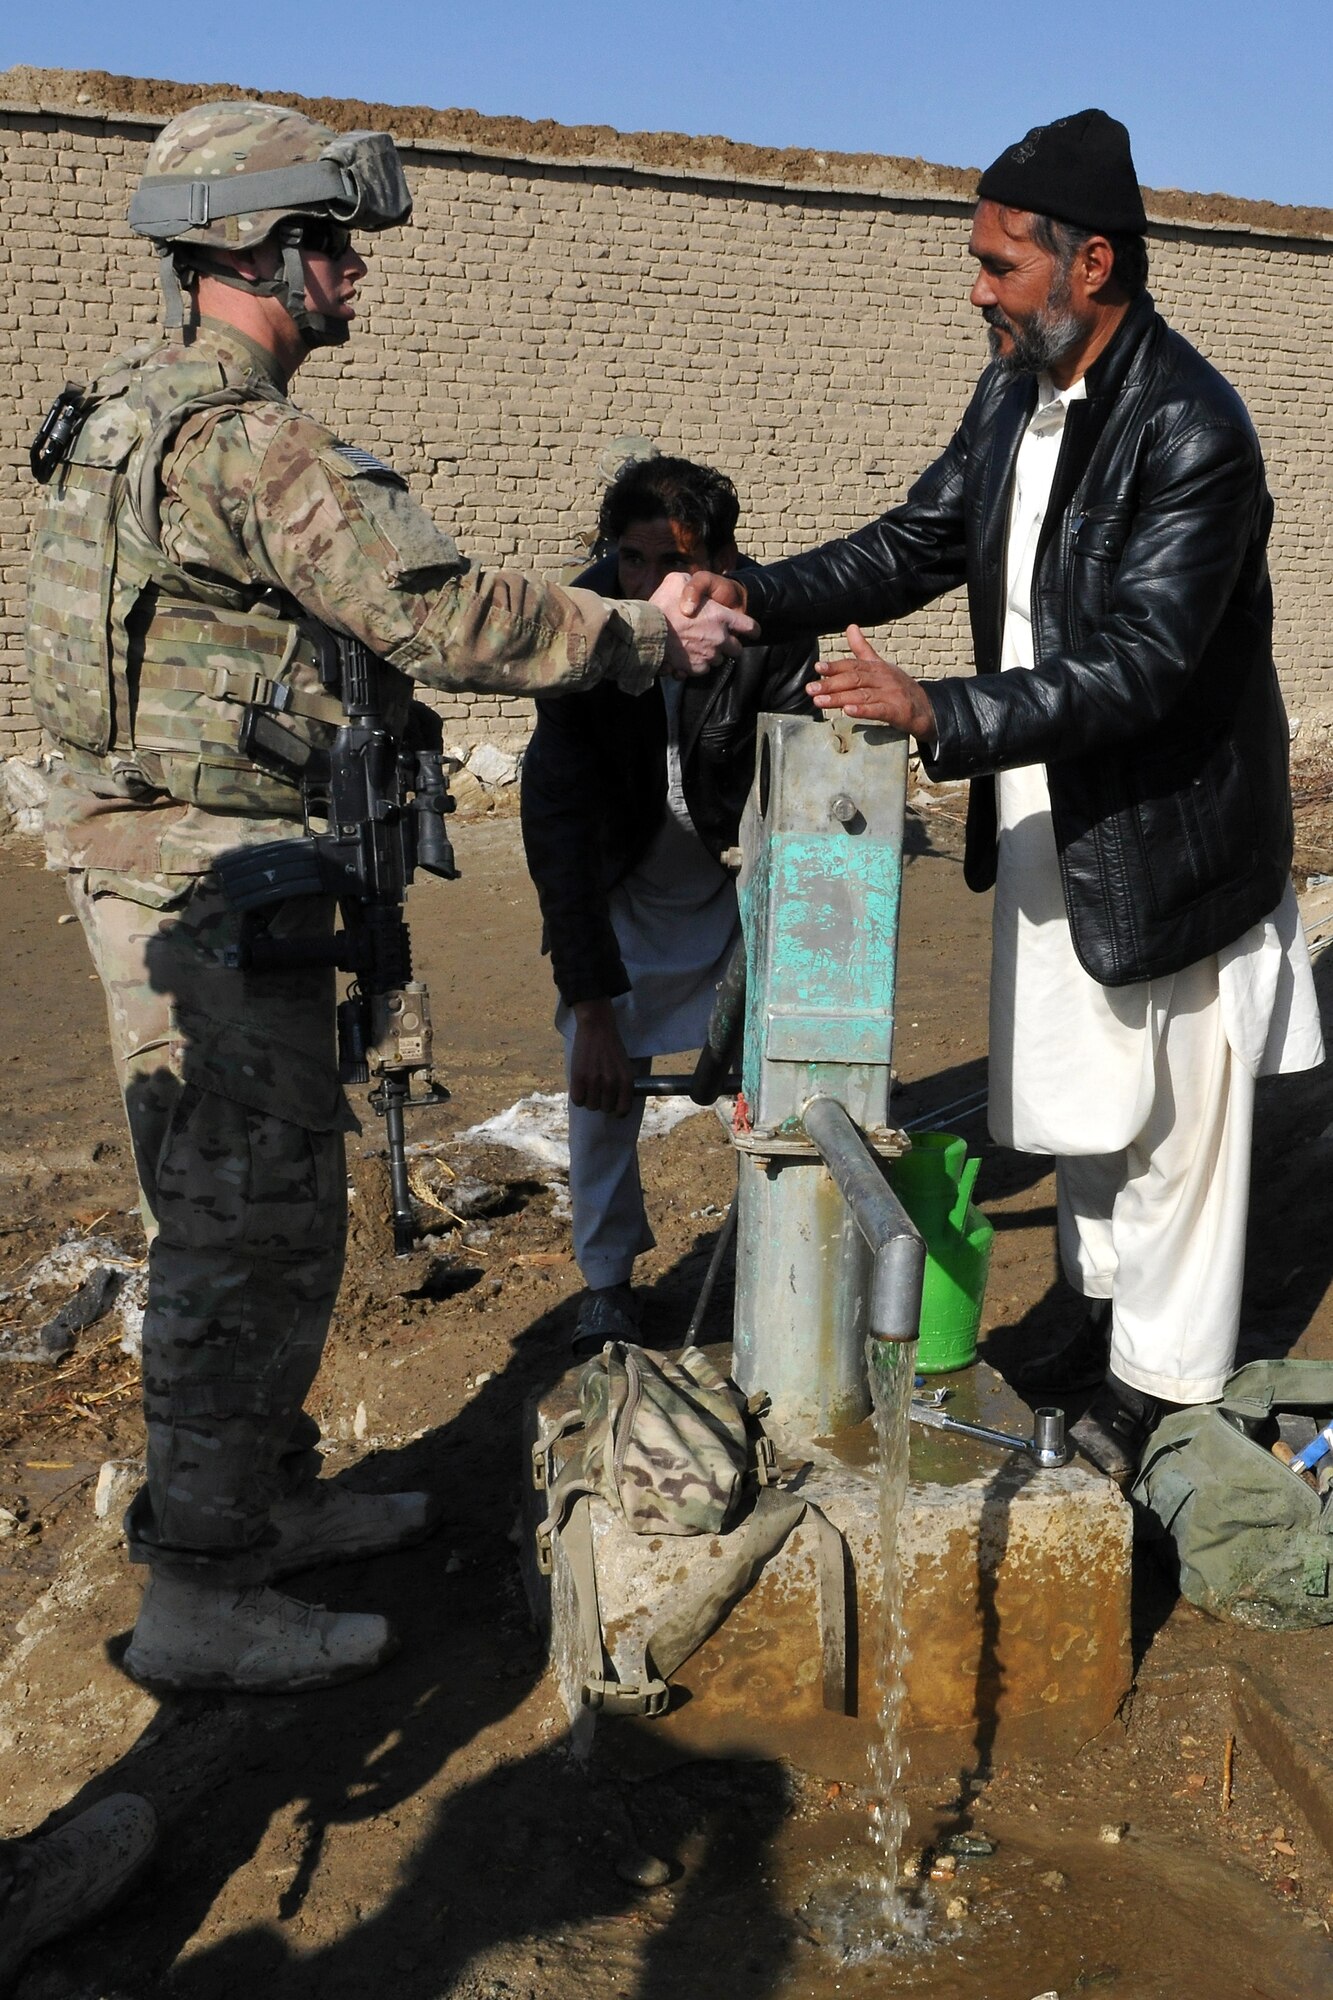 U.S. Airmen and local Afghan elders gather around the recently fixed water well in the heart of a small village near Bagram Airfield, Afghanistan, on Jan. 26, 2013. Together they traded ideas on how to fix the pump and bring the fresh groundwater back to the village. (U.S. Air Force photo/Senior Airman Chris Willis)
